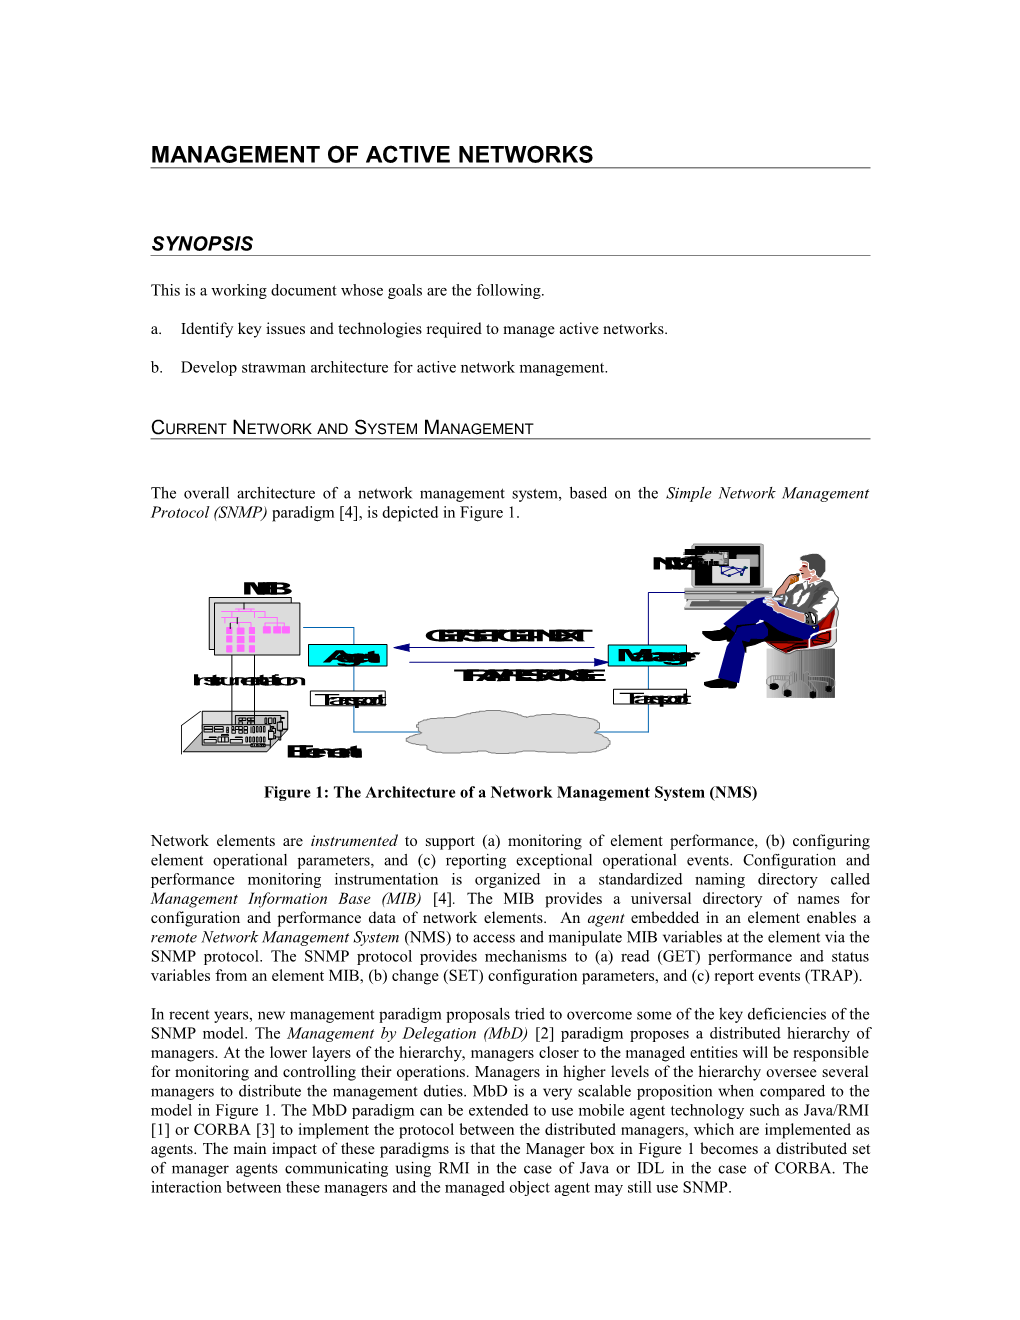 Management of Active Networks